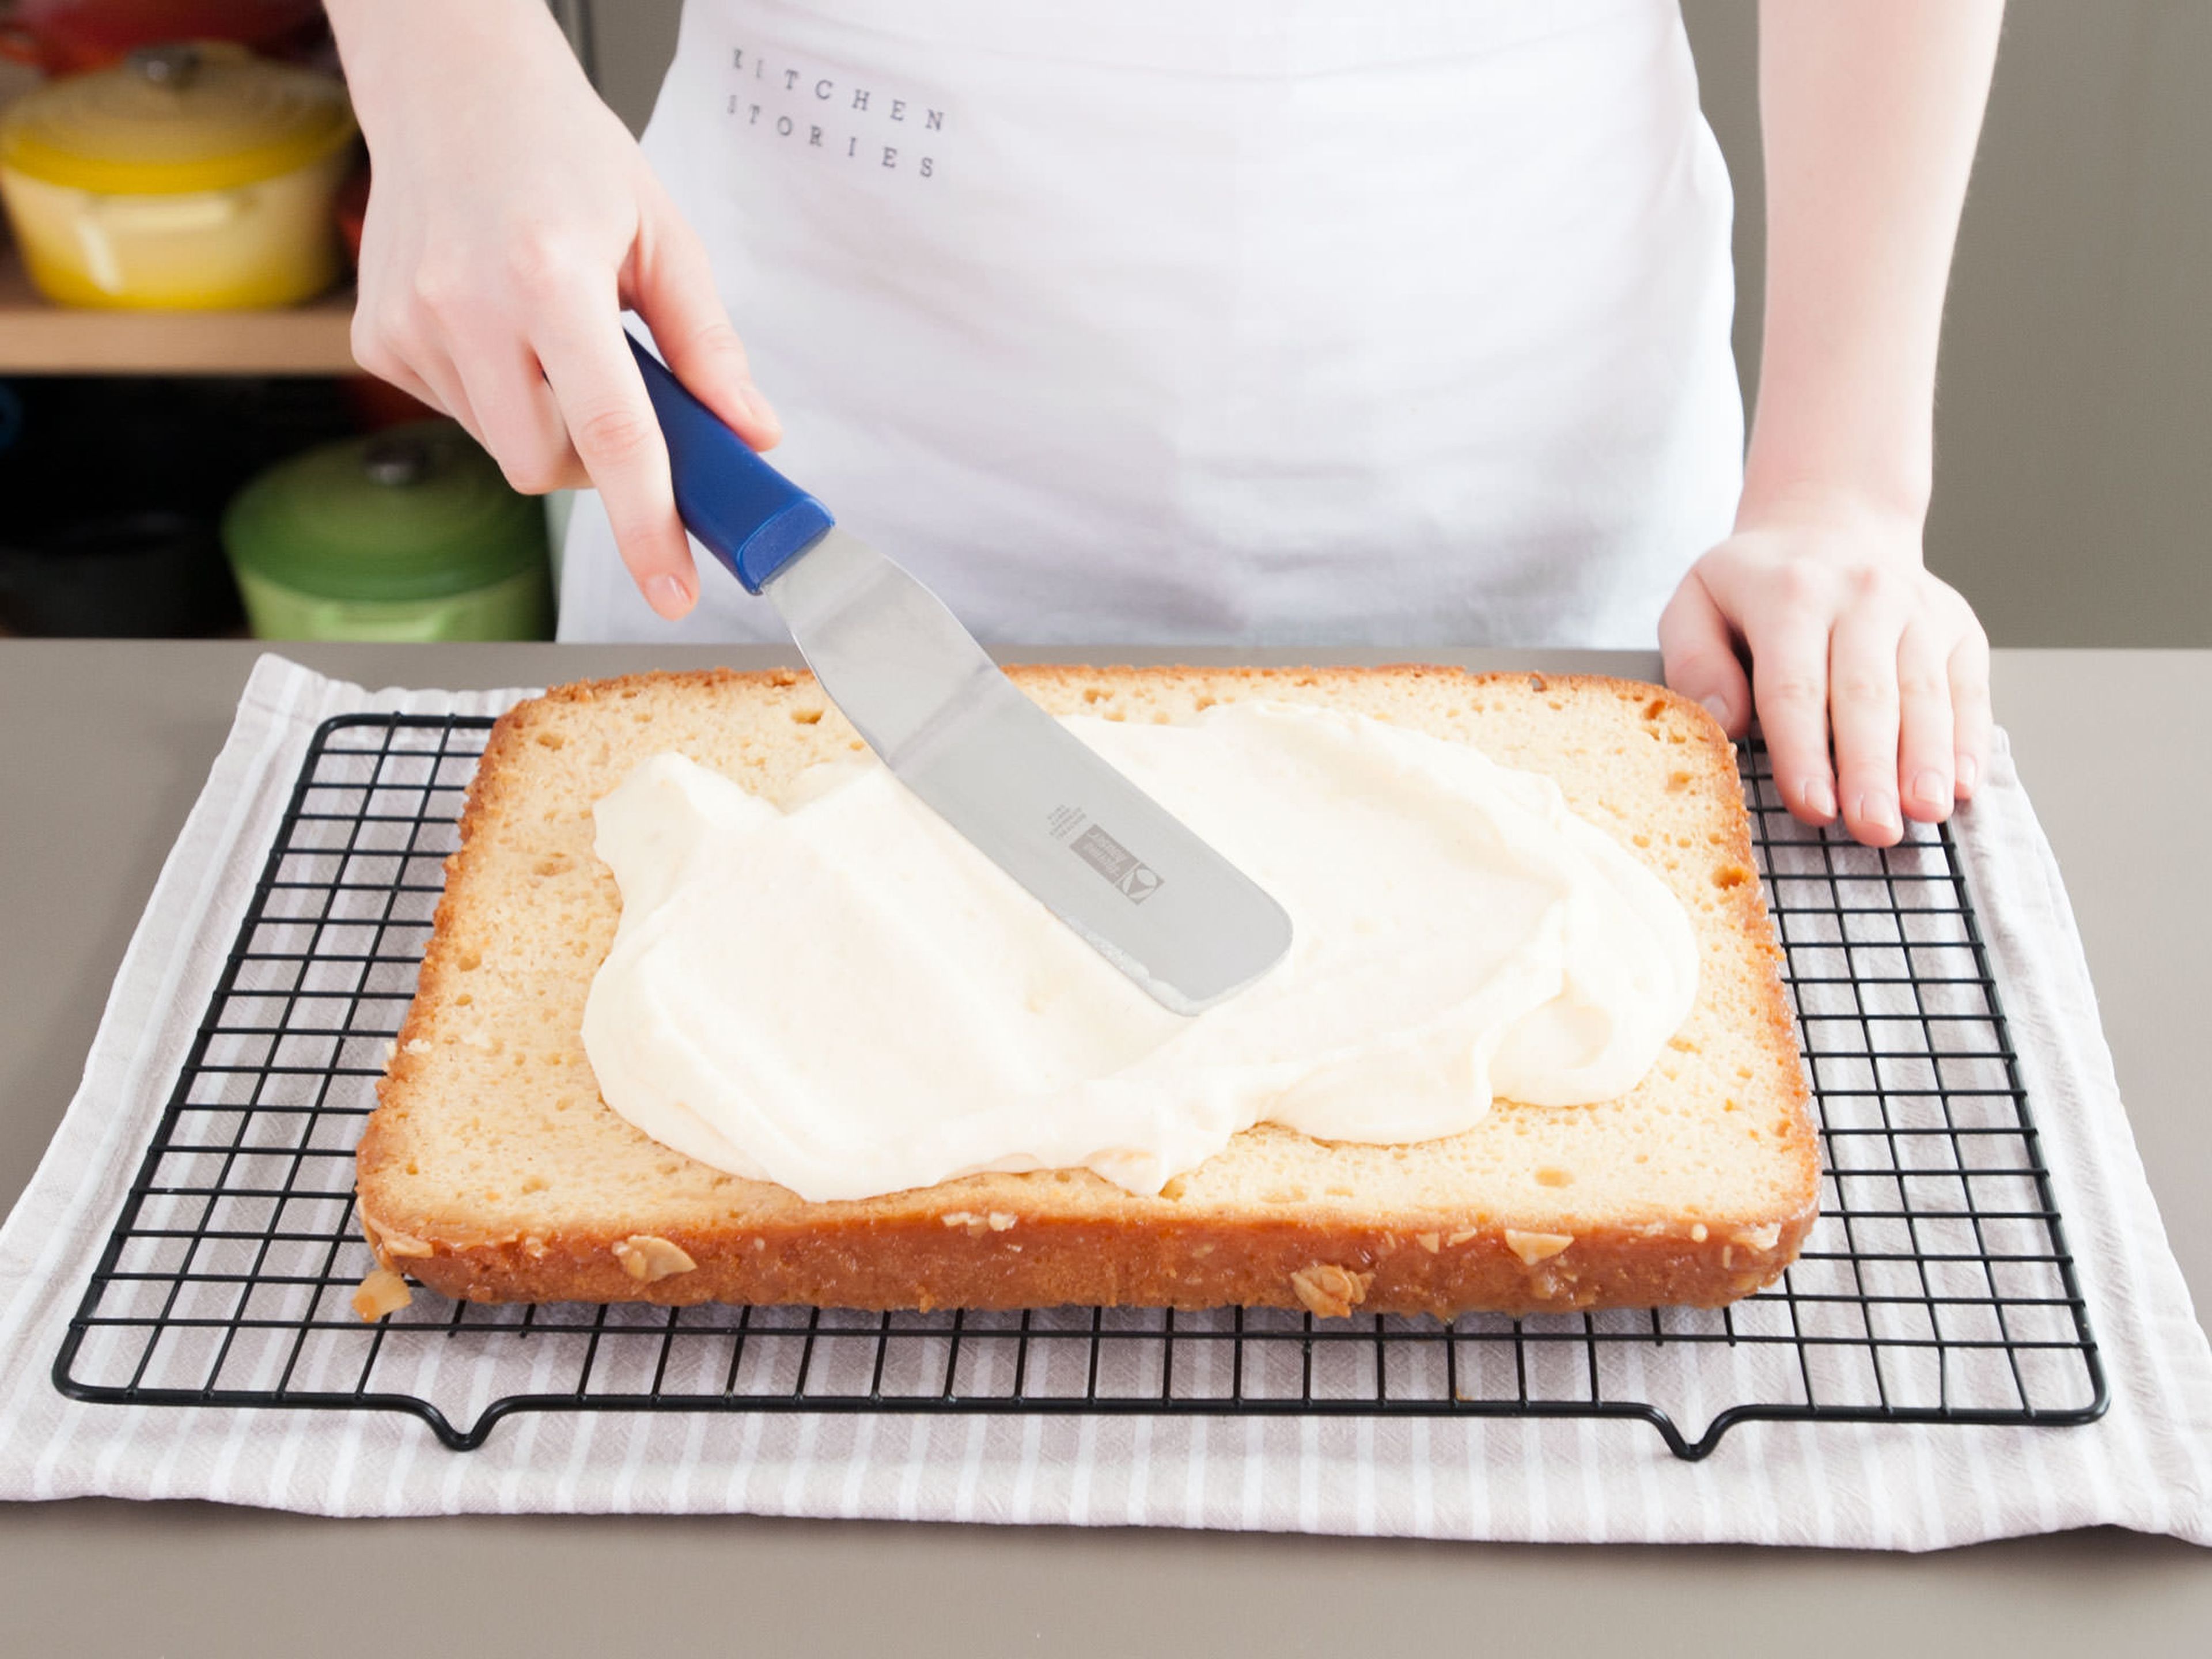 Slice cooled cake in half horizontally with a serrated knife. Spread pastry cream filling evenly over bottom half of the cake.